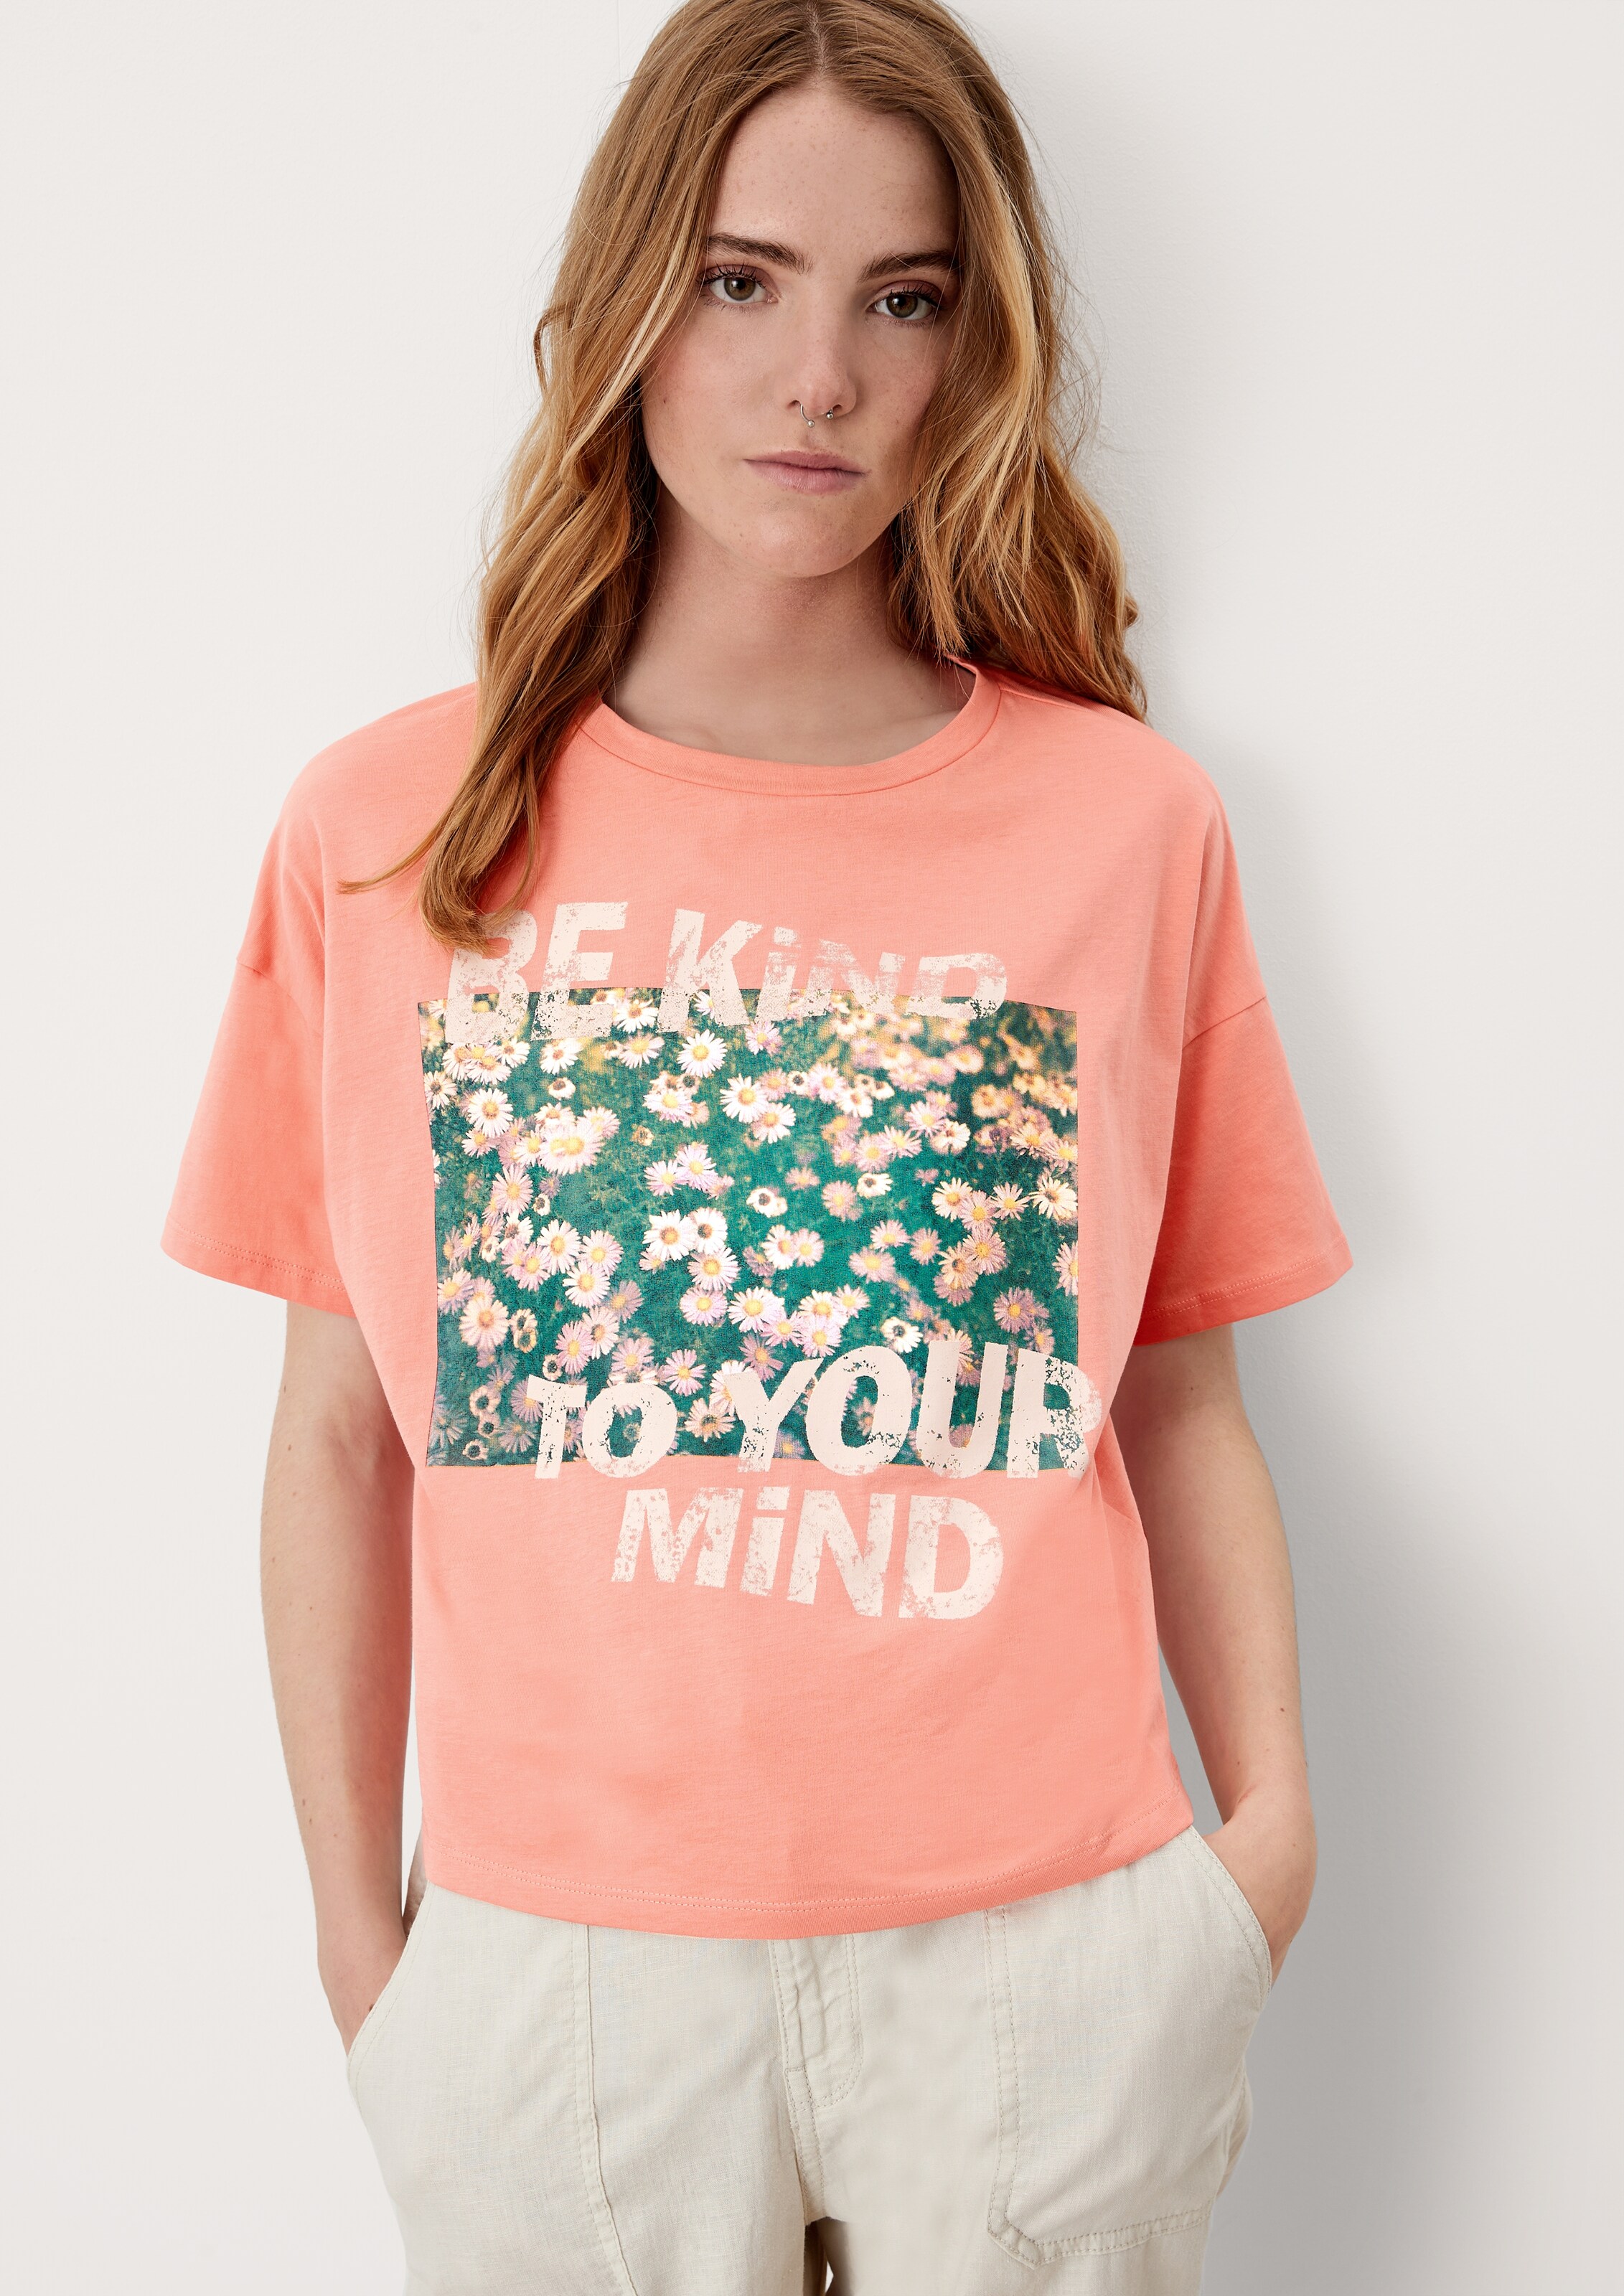 Frauen Shirts & Tops QS by s.Oliver T-Shirt in Orange - IS30324